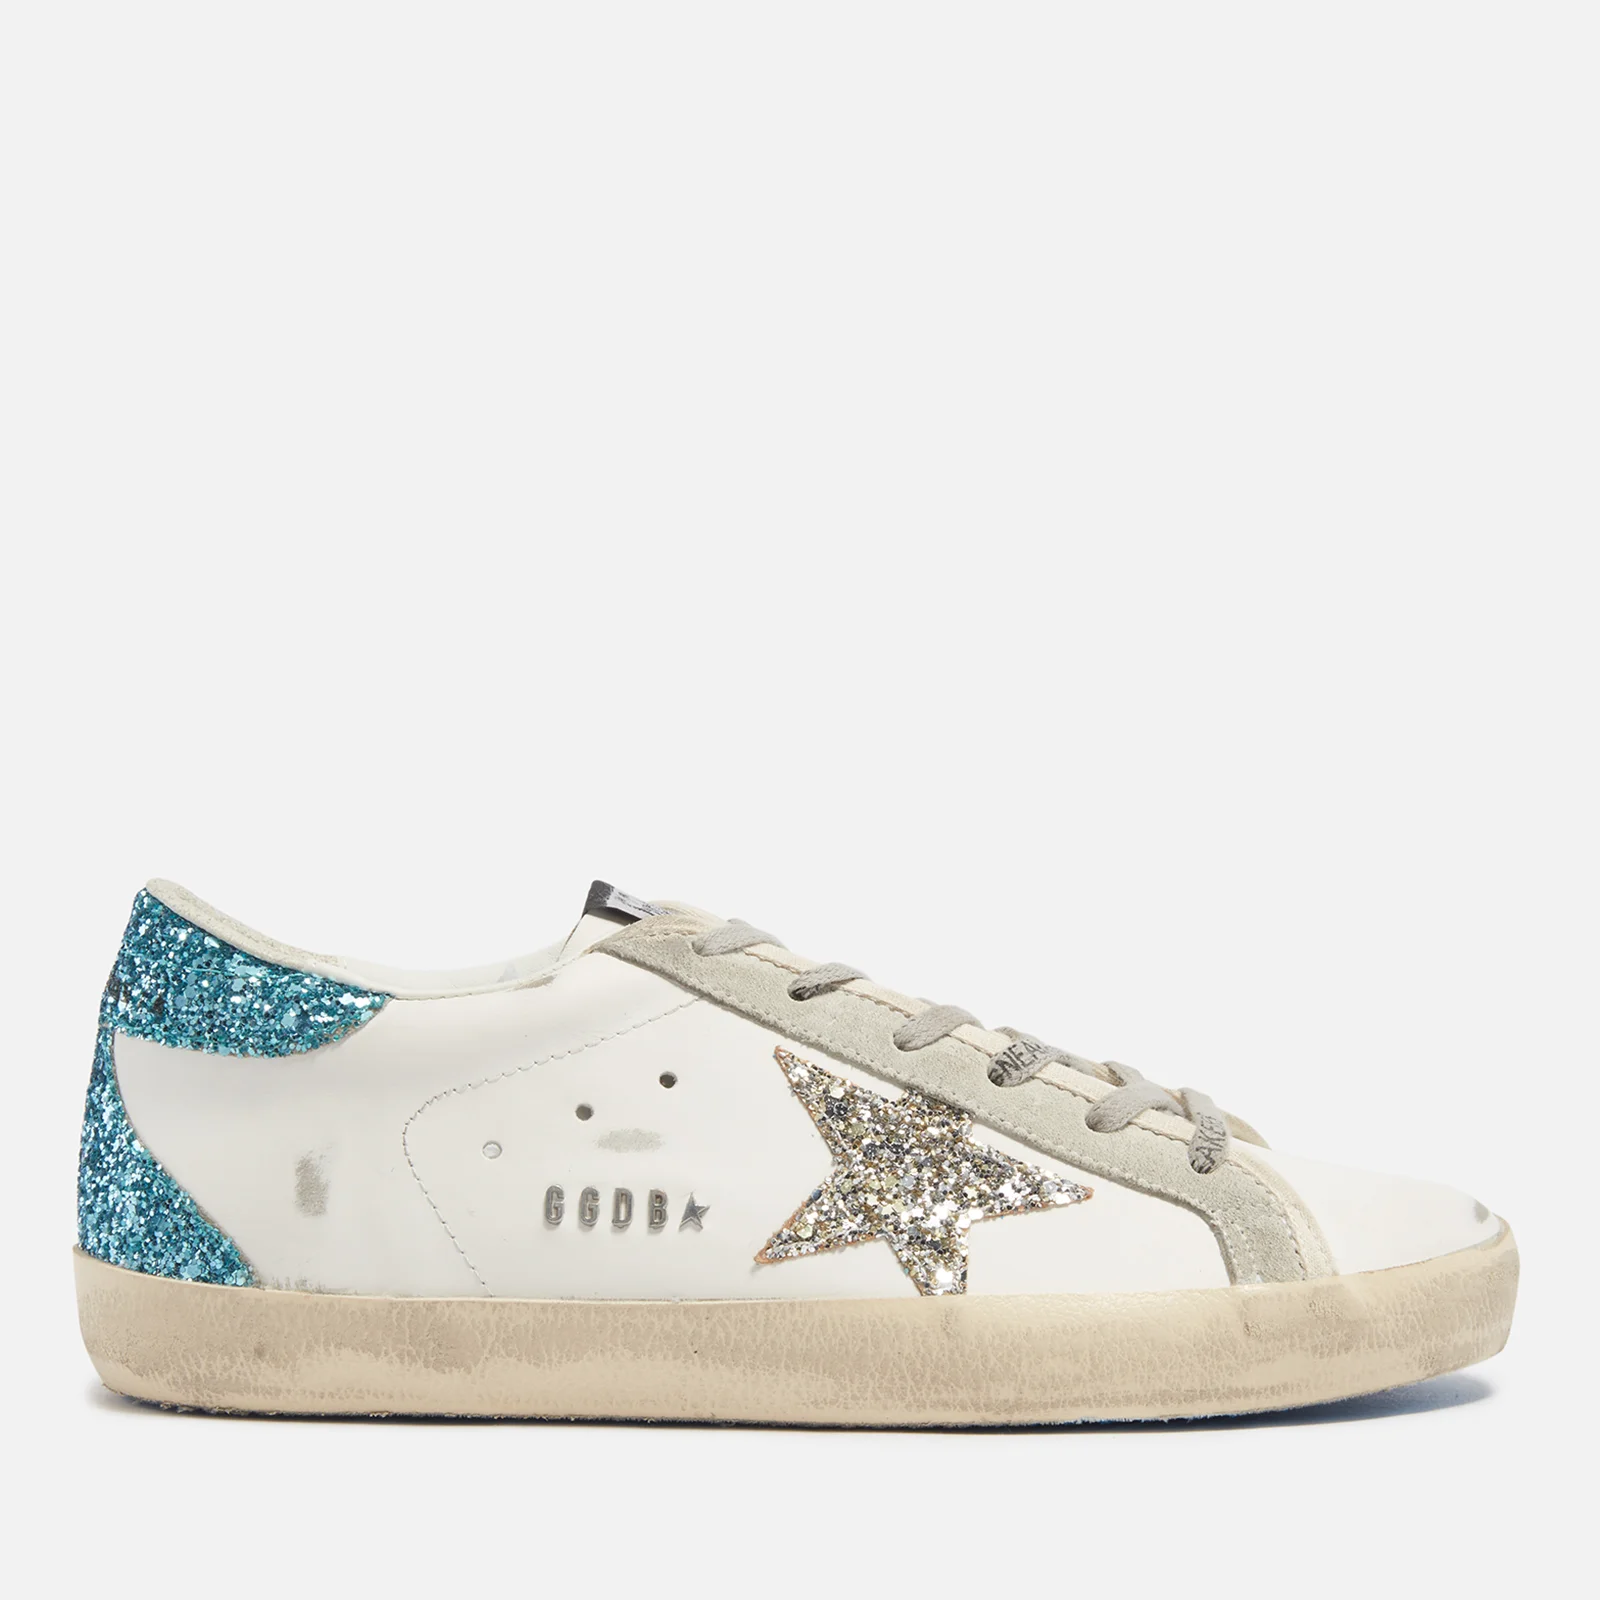 Golden Goose Women's Superstar Leather and Suede Trainers Image 1